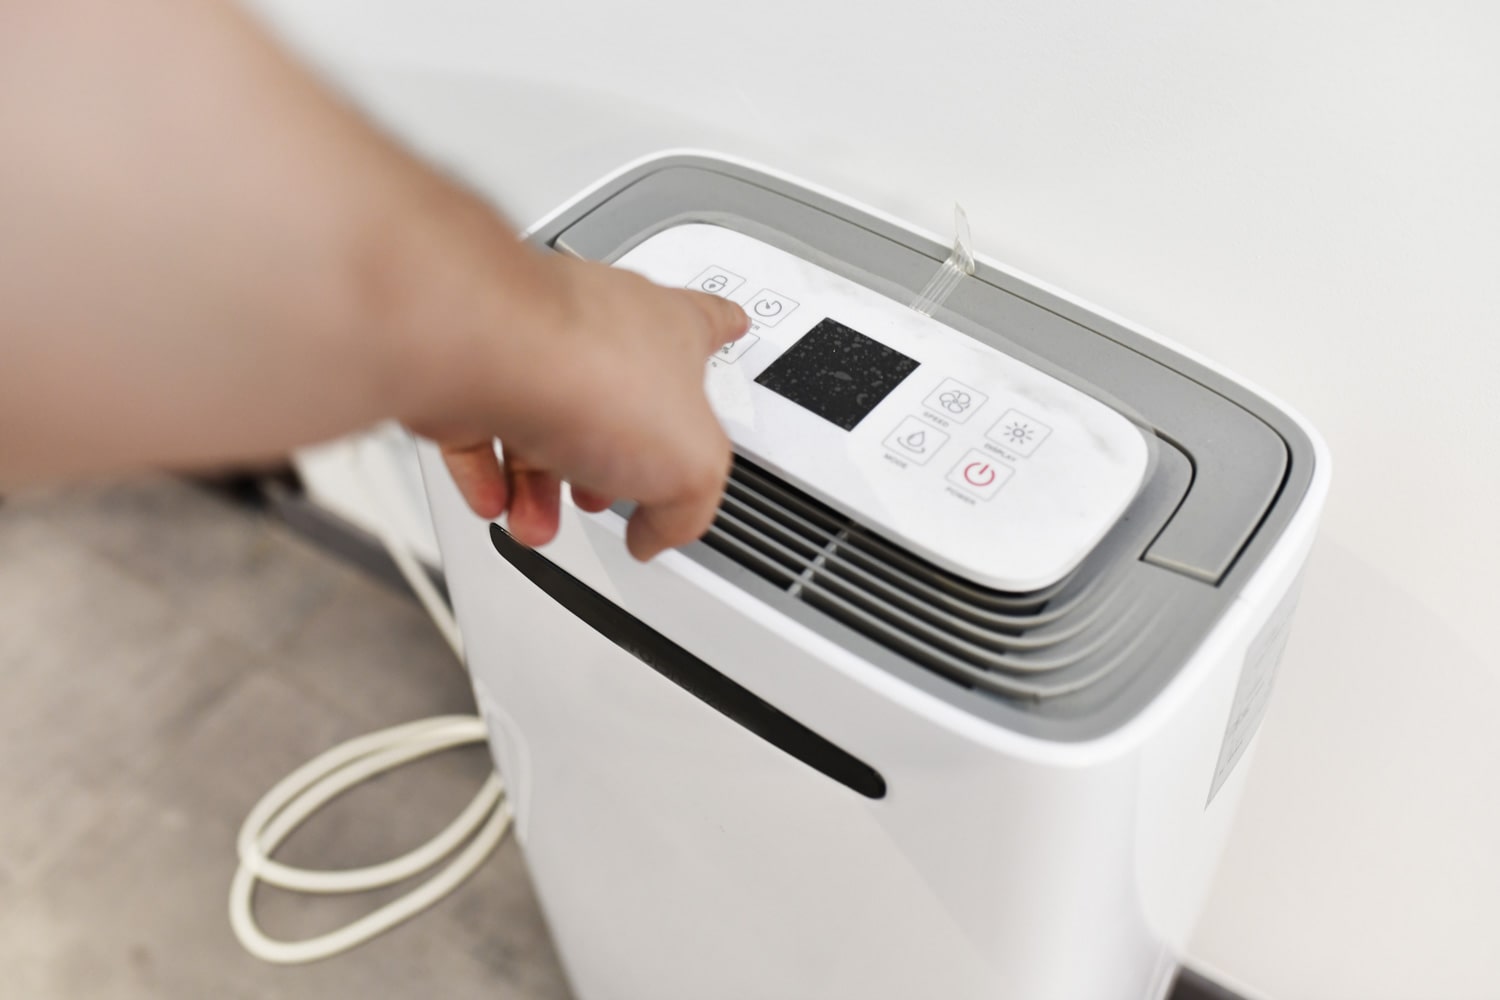 man's hand turning on a dehumidifier in the entrance of a house or office. To prevent joint pain